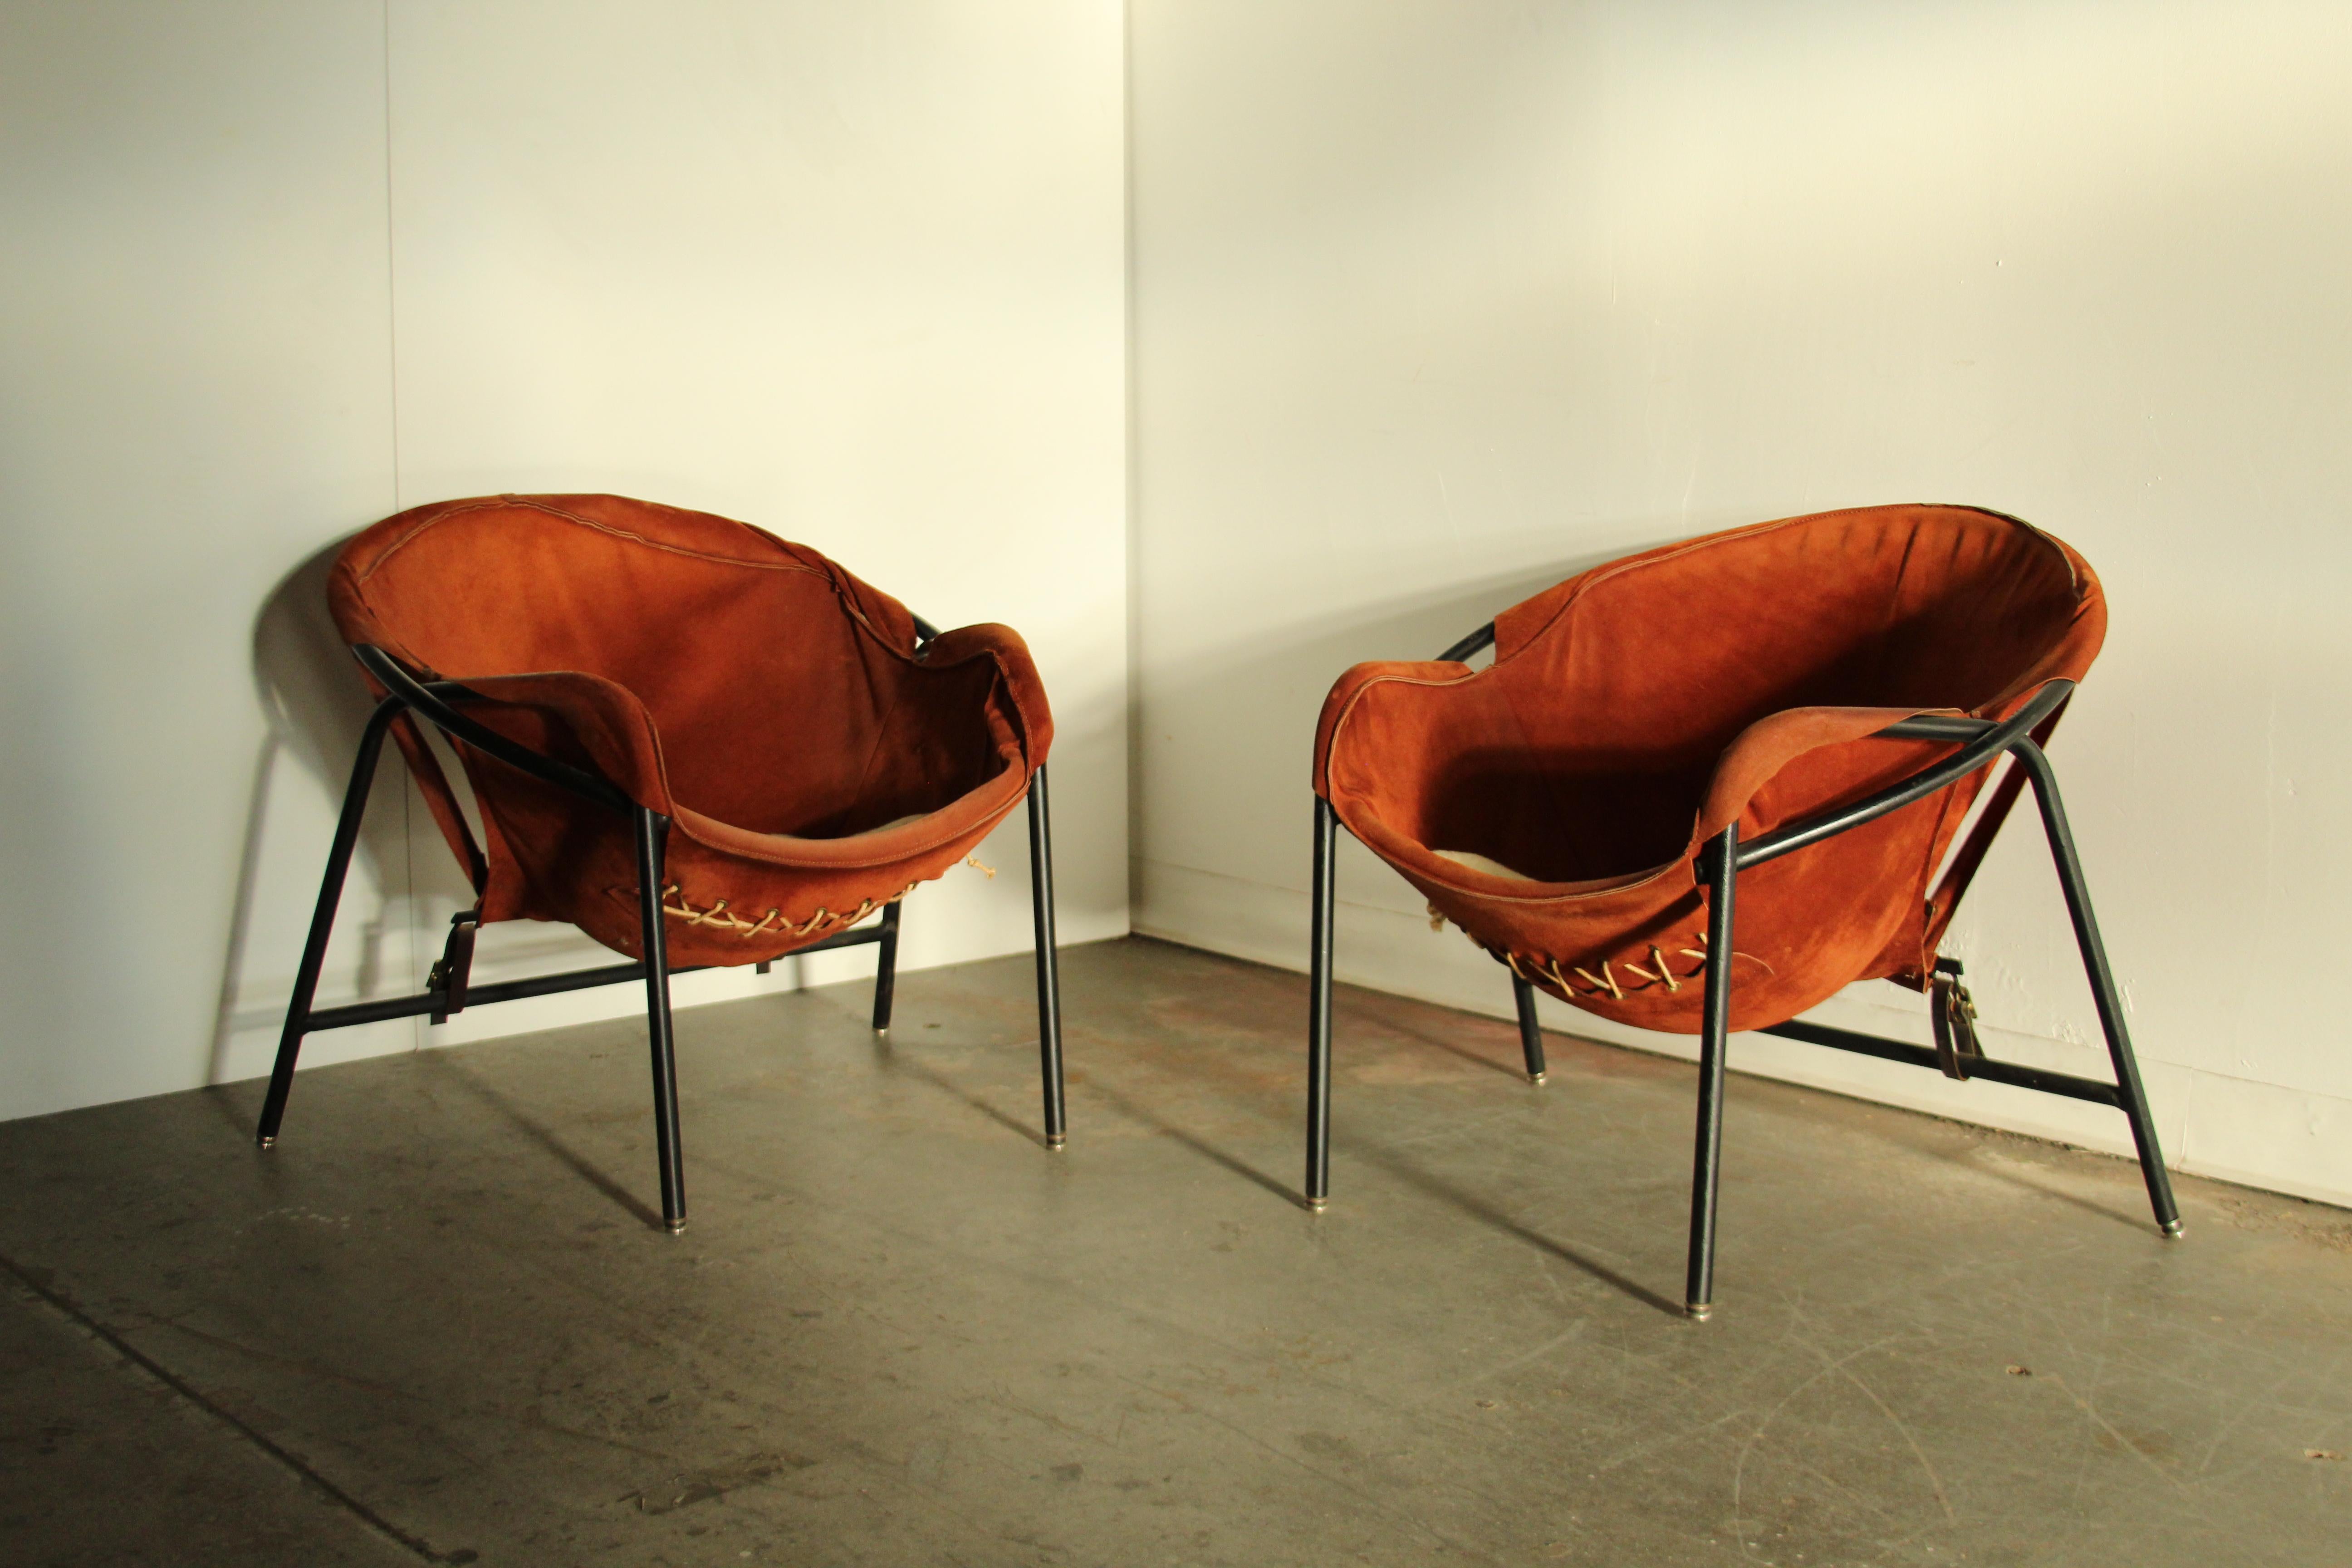 A fabulous pair of easy chairs designed by Erik Ole Jørgensen and produced by Bovirke in the 1950s. Original suede sling seats with visible rope detailing on underside. Blackened steel frame with self-leveling feet. Charming leather buckle straps on